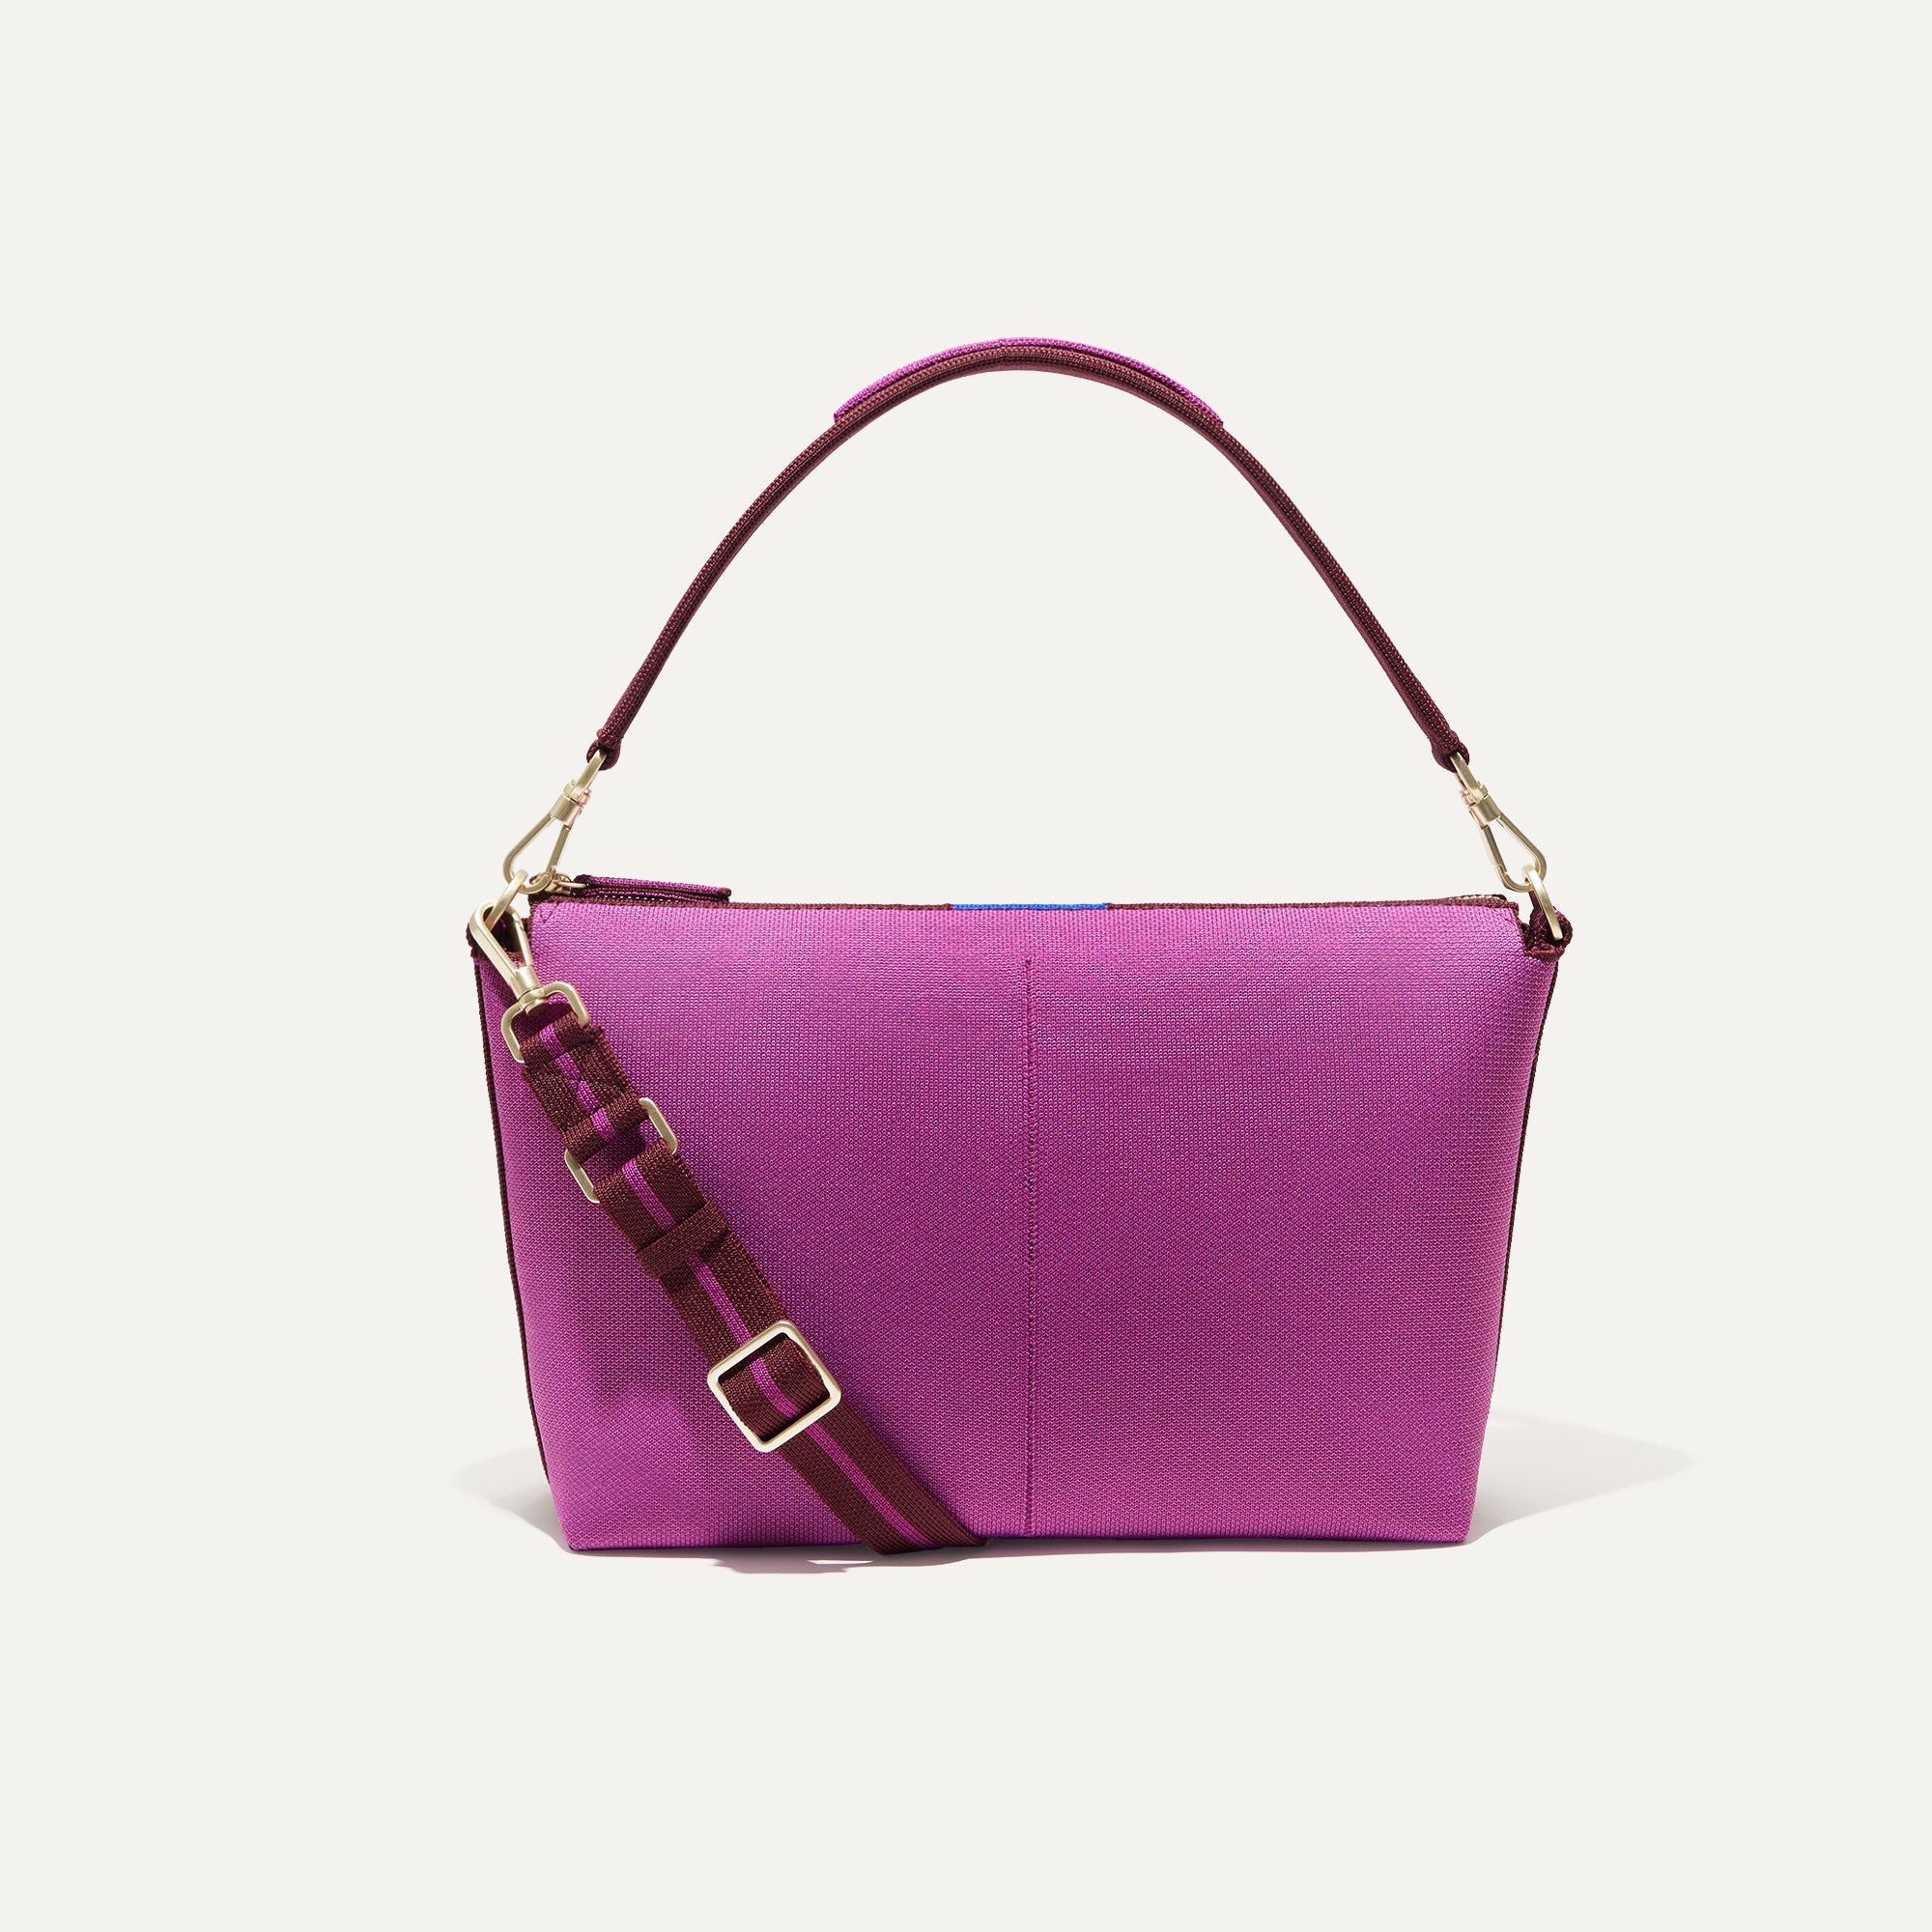 Rothy's - The Daily Crossbody in Pink